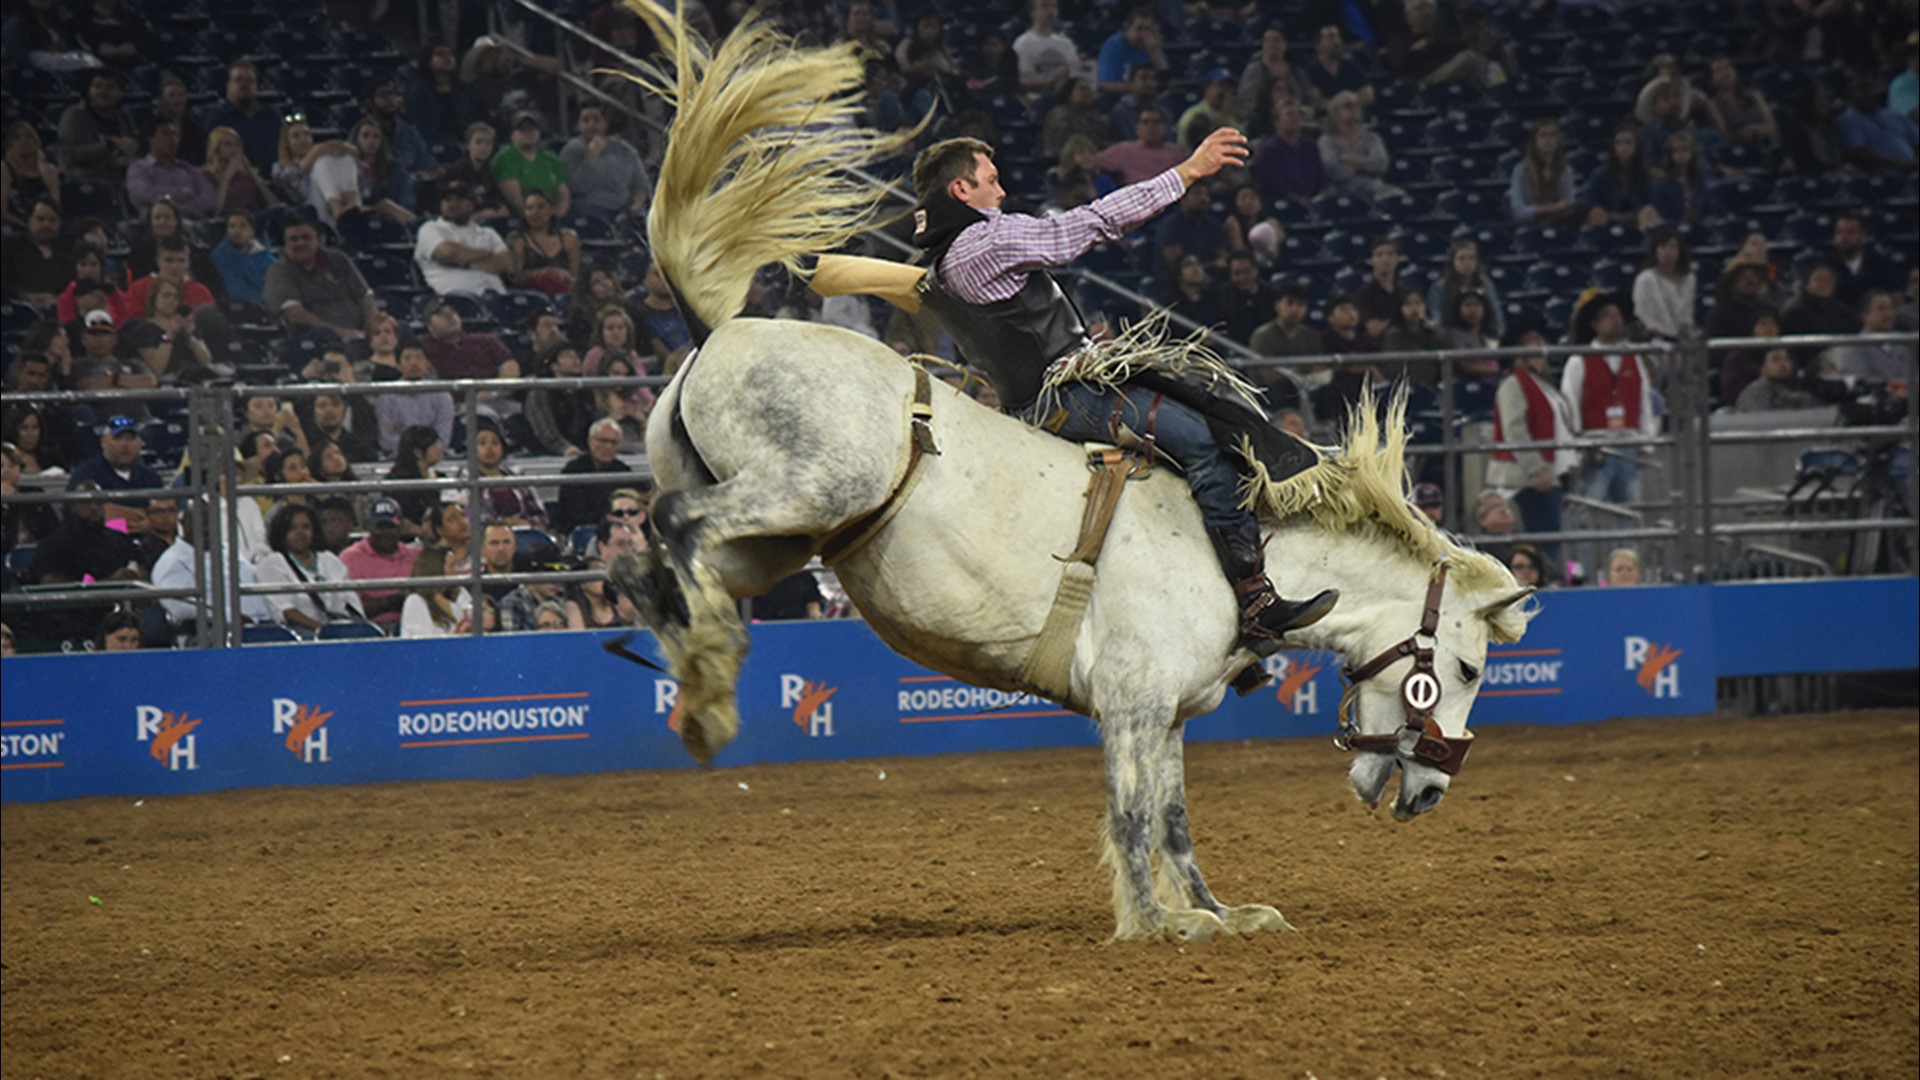 At Houston's Livestock Show and Rodeo, Texans like to indulge.